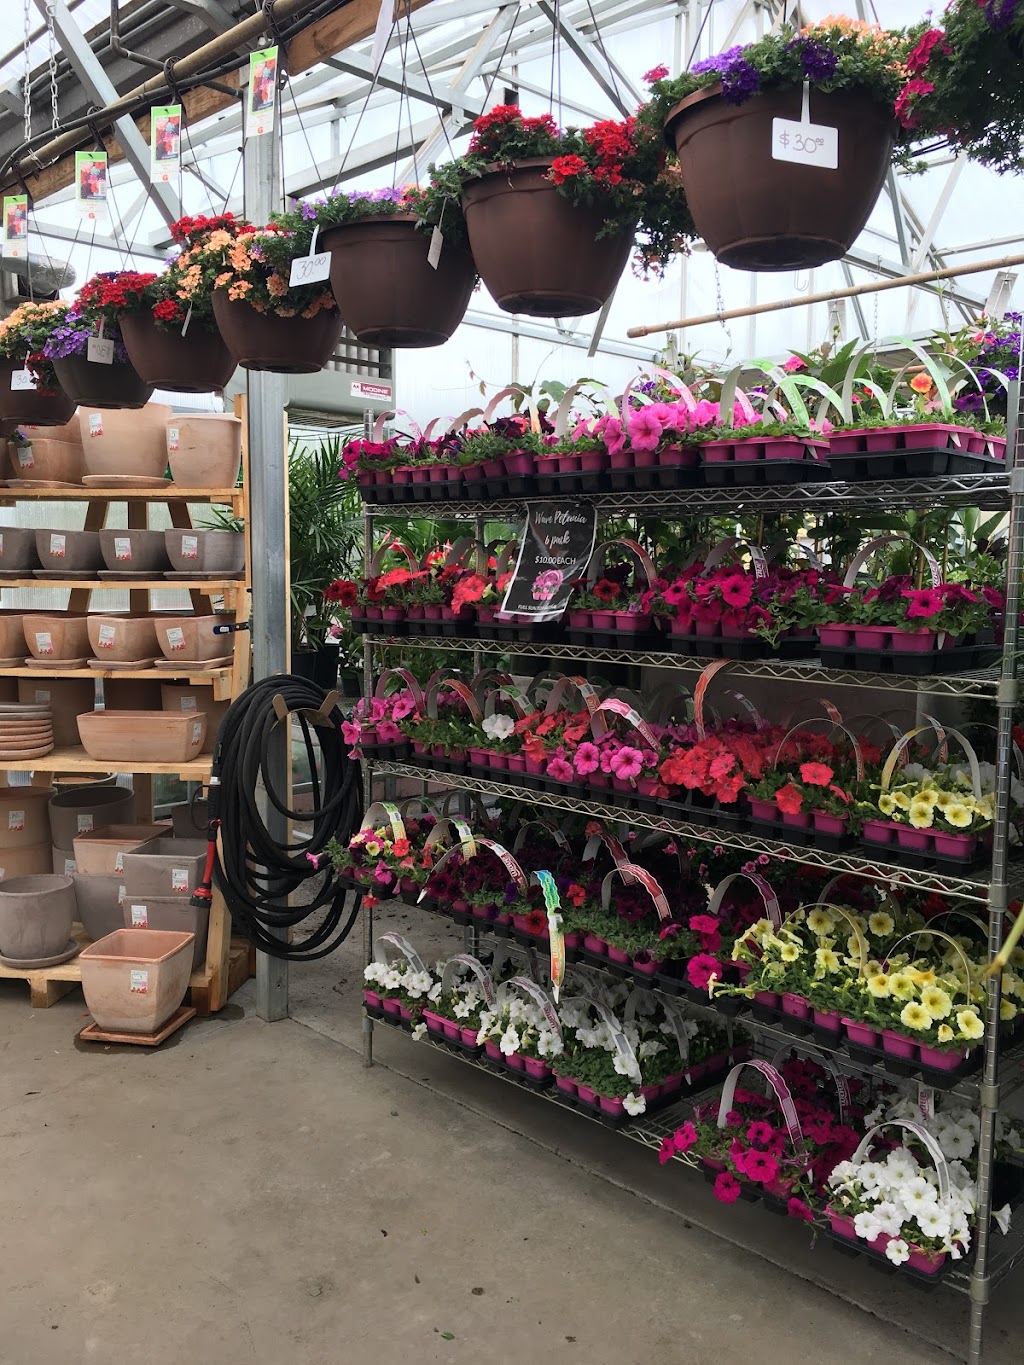 Lakes Floral, Gift & Garden | 508 Lake St S, Forest Lake, MN 55025, USA | Phone: (651) 464-2134